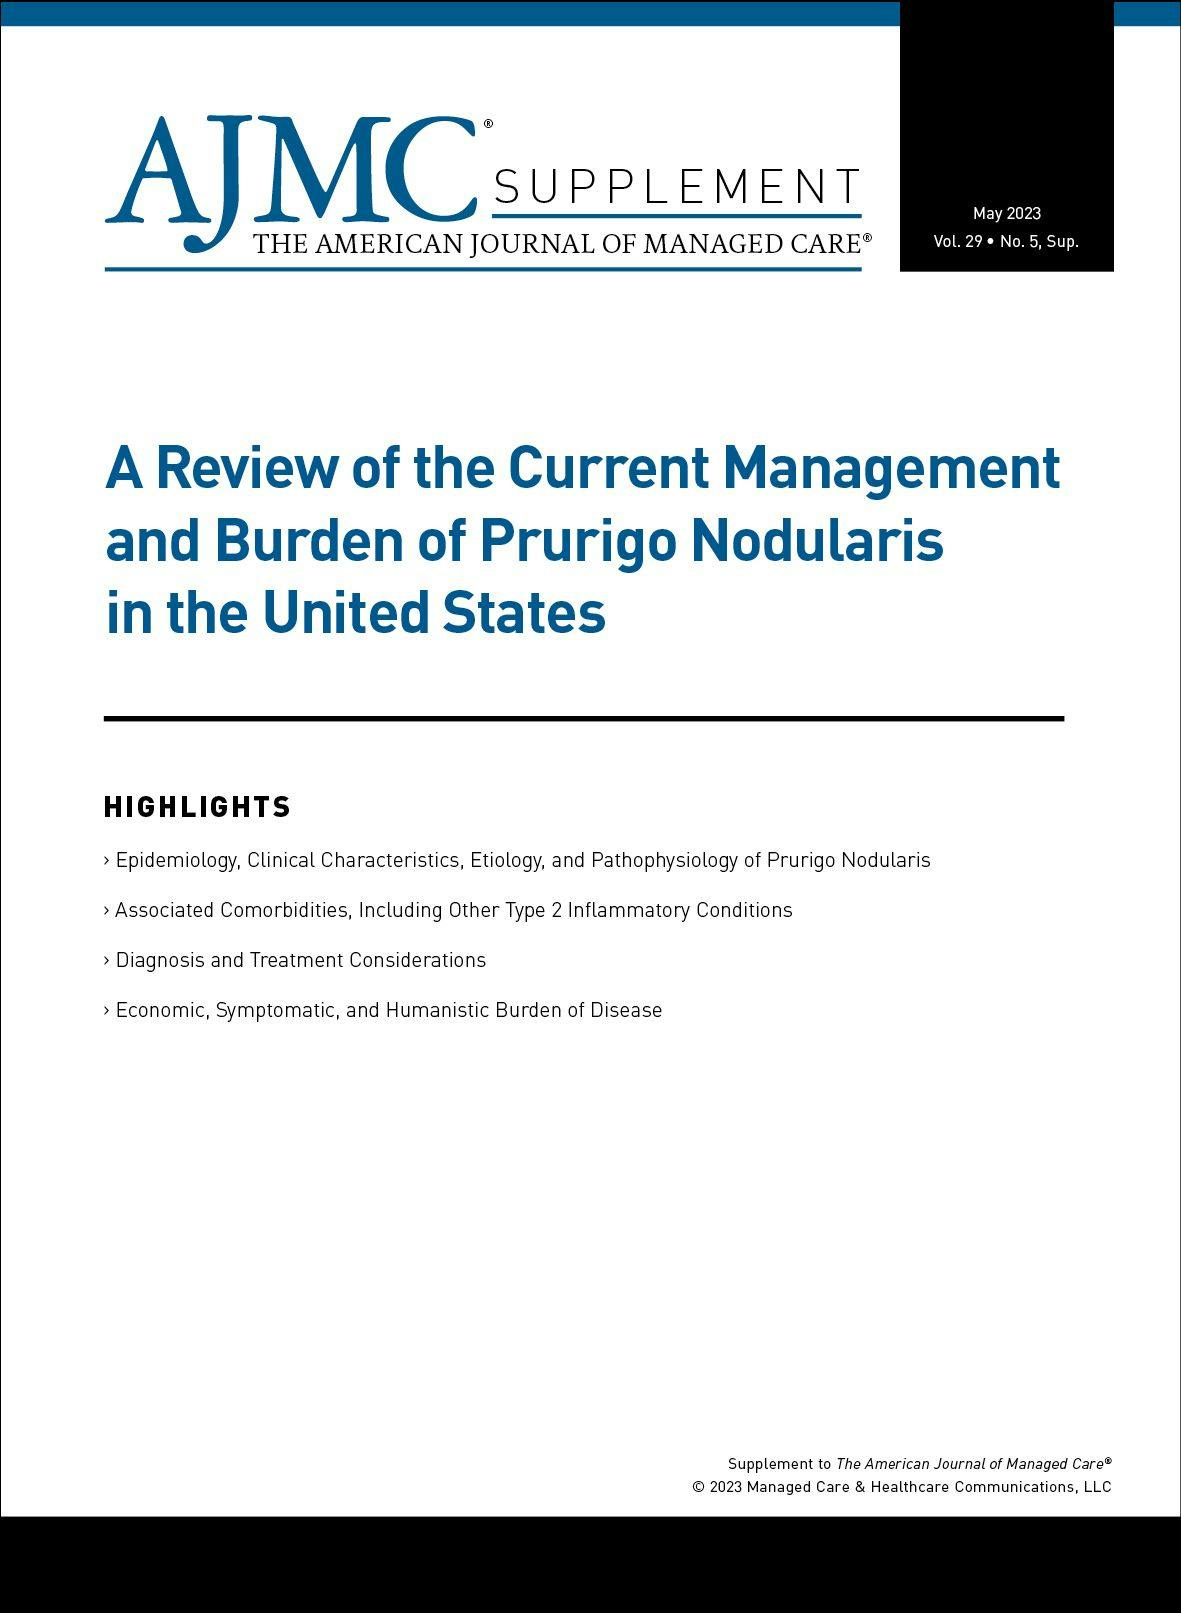 A Review of the Current Management and Burden of Prurigo Nodularis in the United States